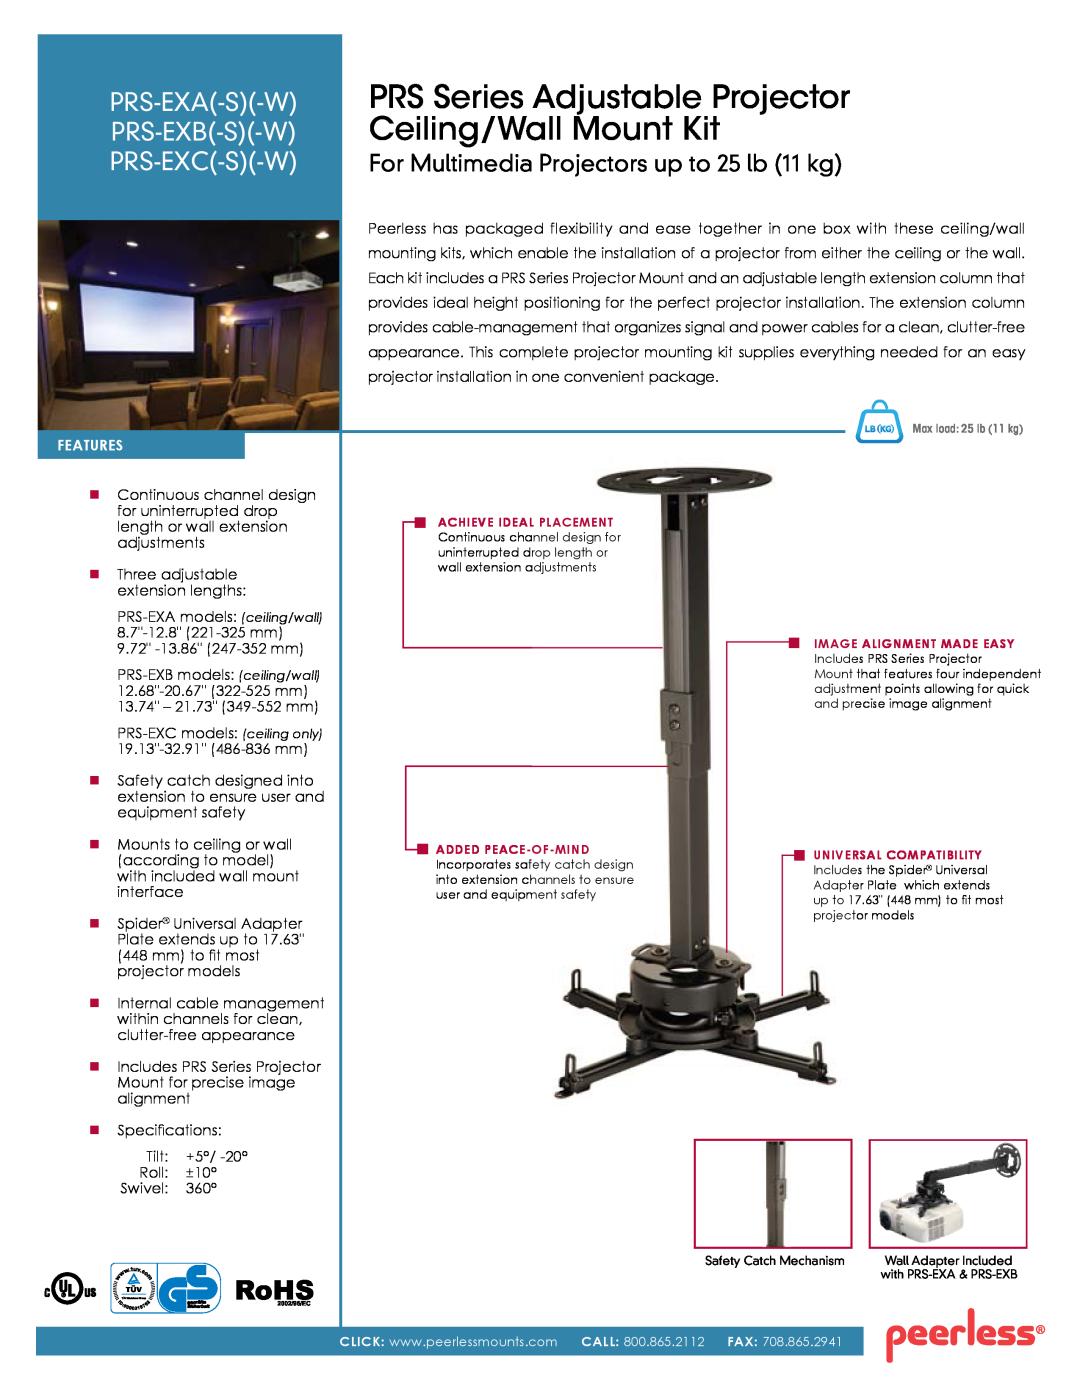 Peerless Industries PRS-EXB(-S)(-W) manual PRS Series Adjustable Projector, Ceiling/Wall Mount Kit, Prs-Exa-S-W, FeatureS 